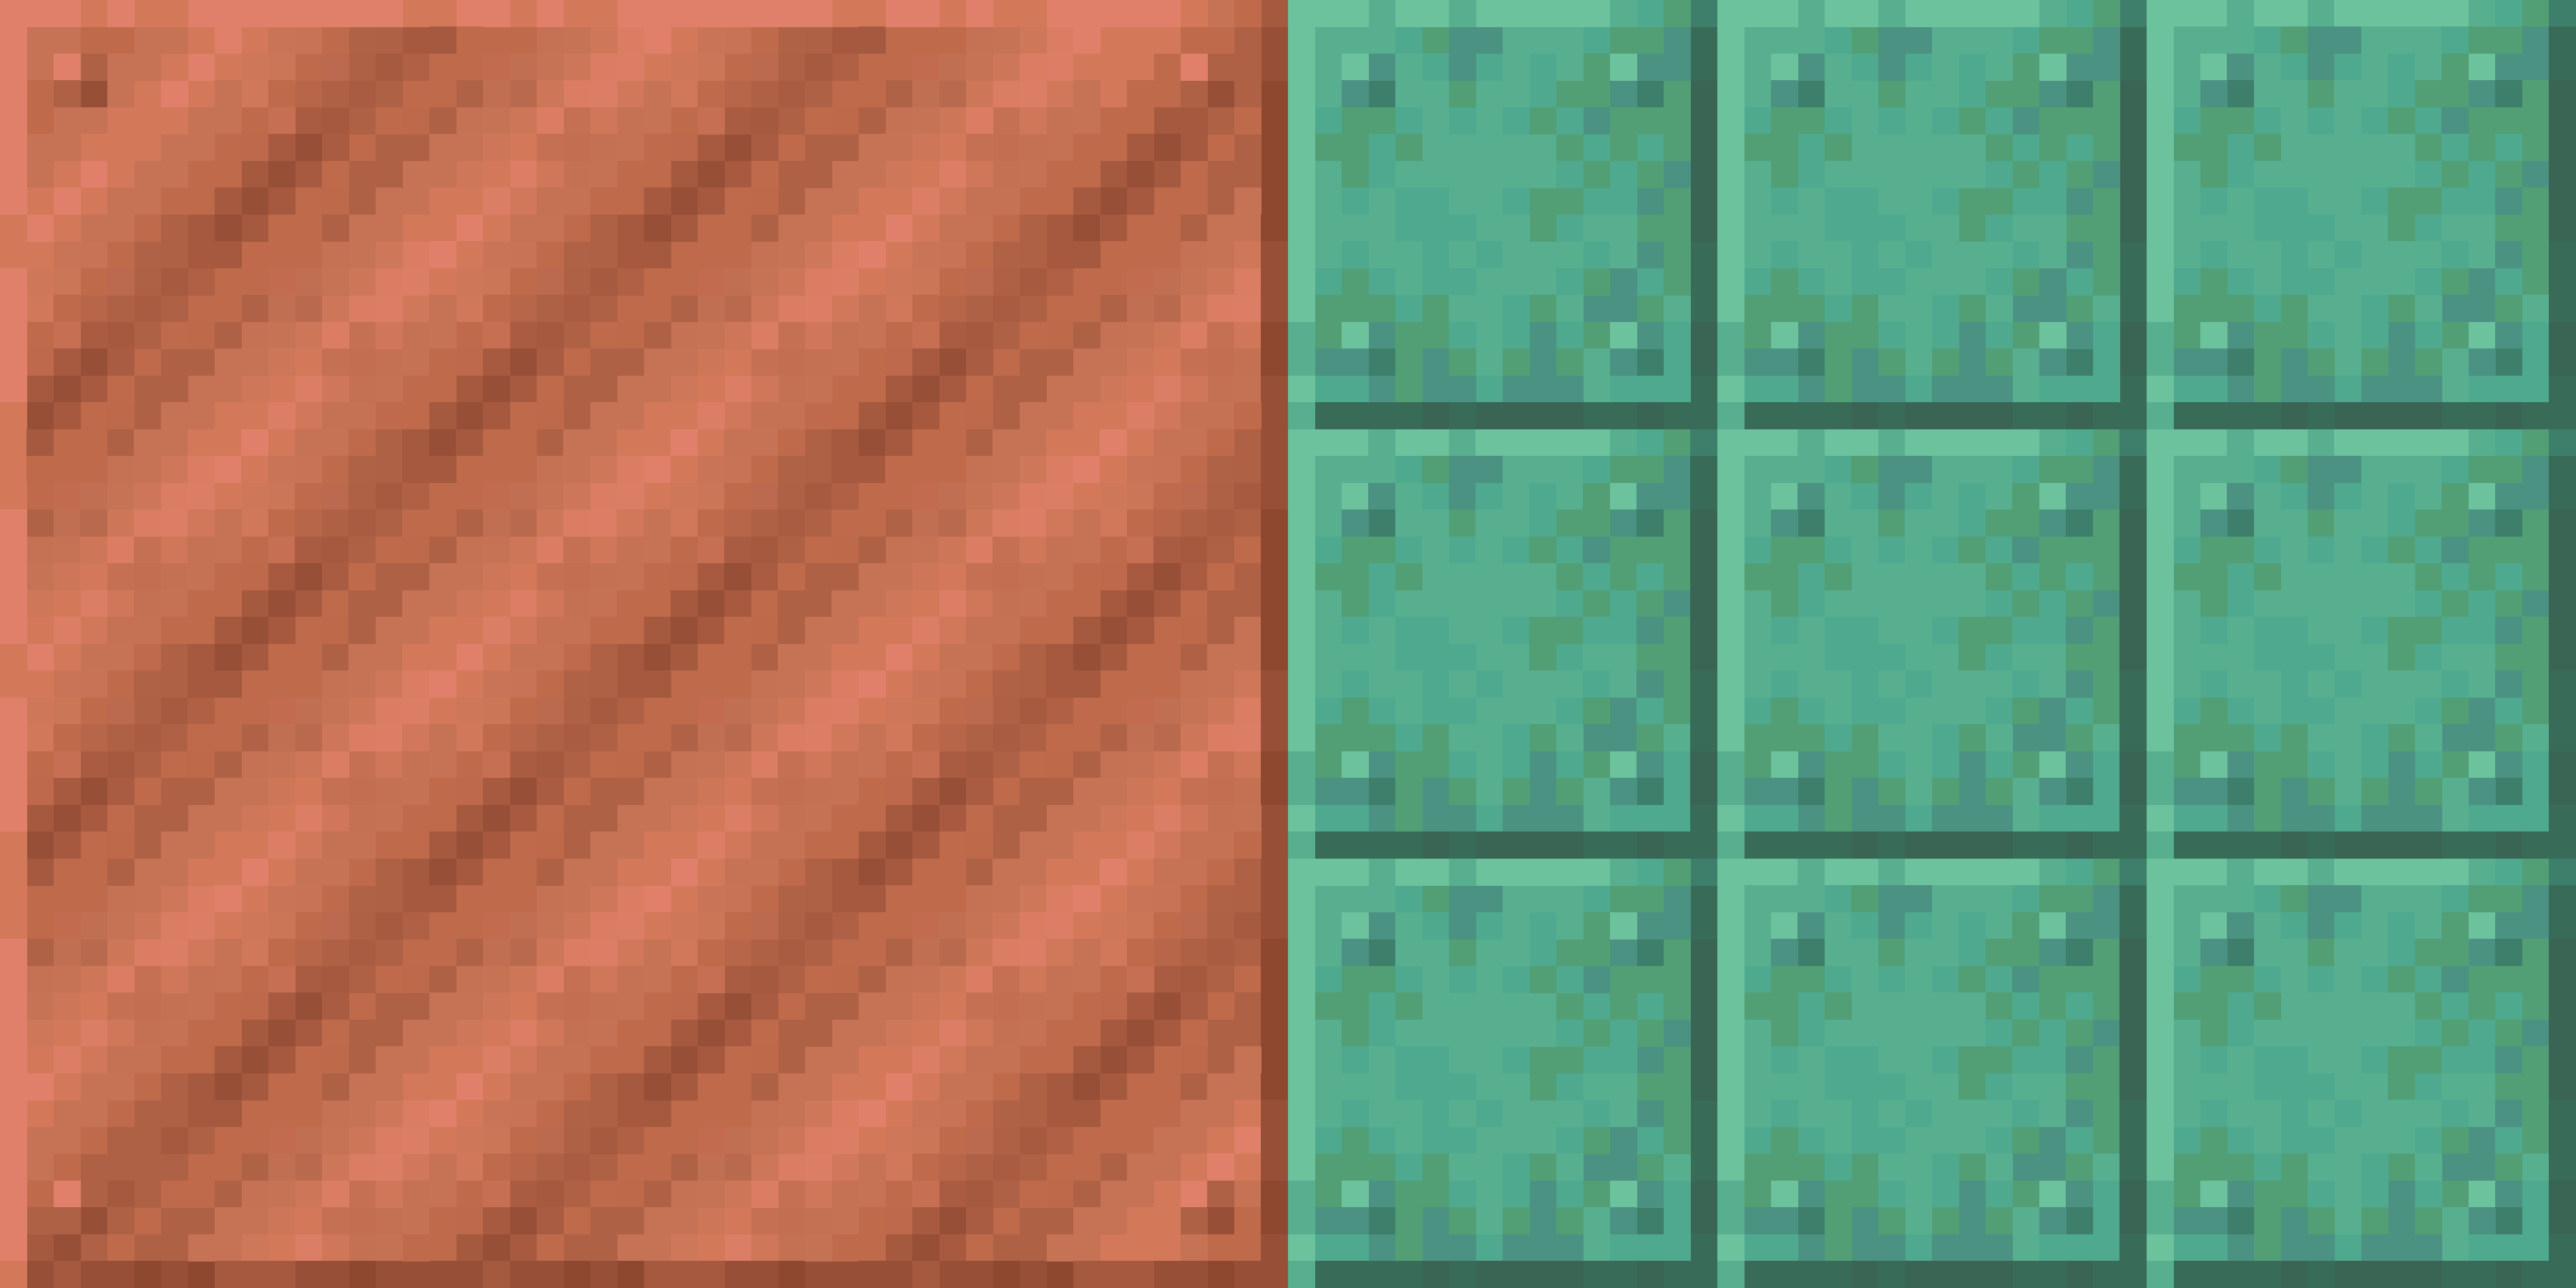 Here, the pack adds connected textures for both blocks but the oxidized copper have been disabled